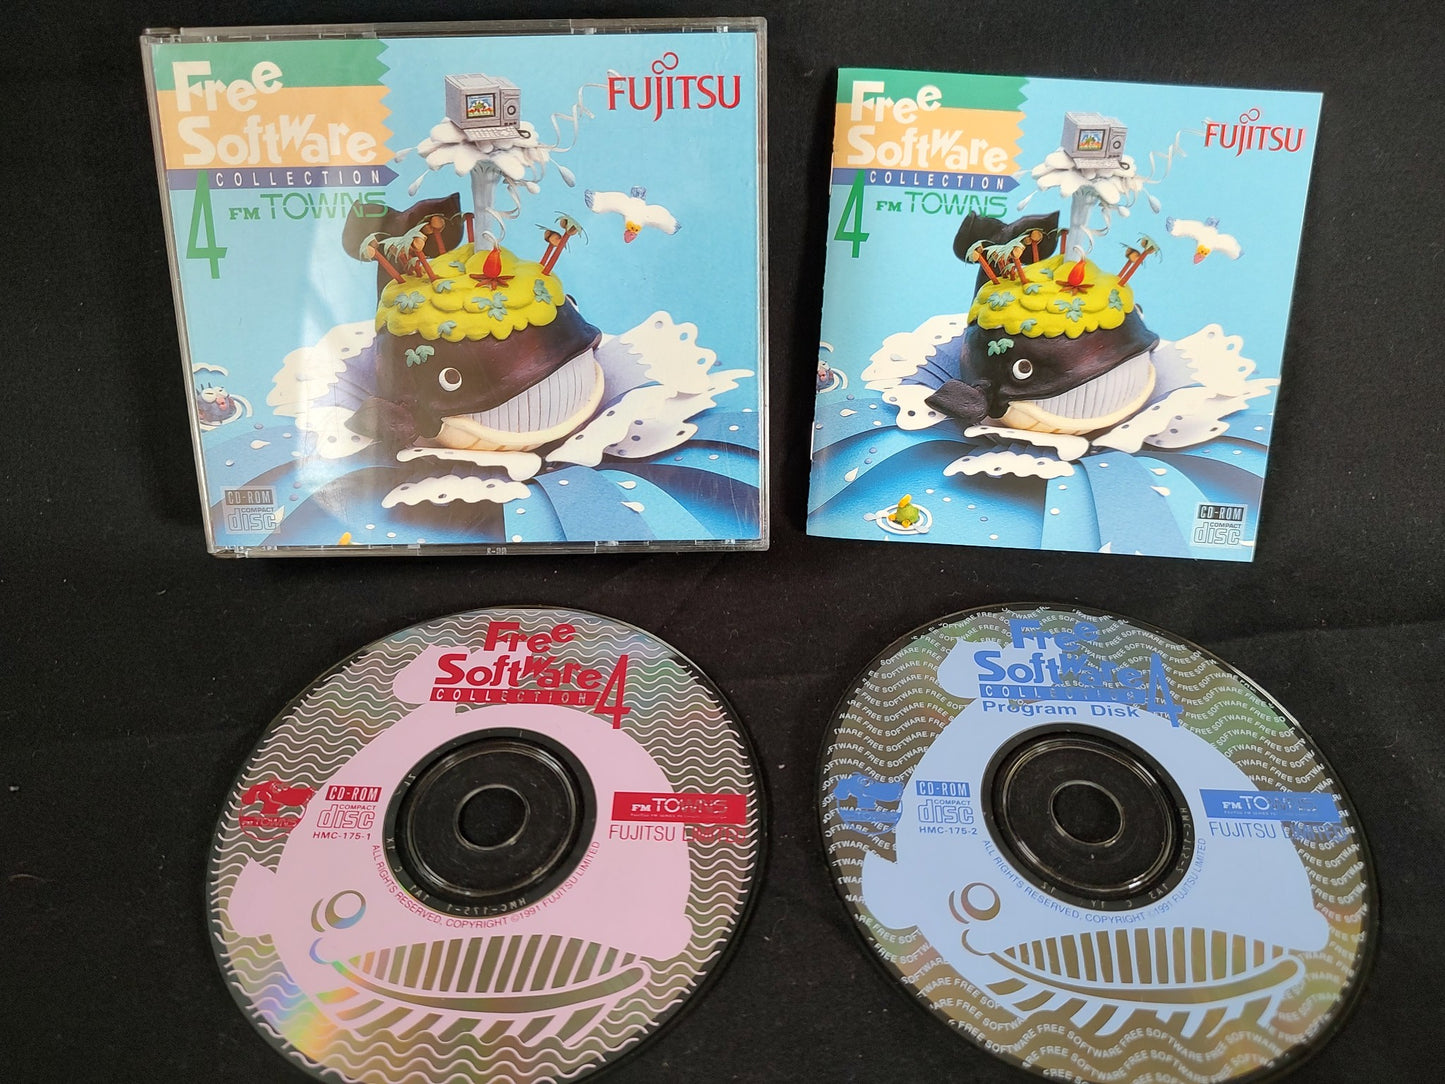 FM TOWNS Free Software collections 4-11 Boxed set Fujitsu Marty, untested-f0925-